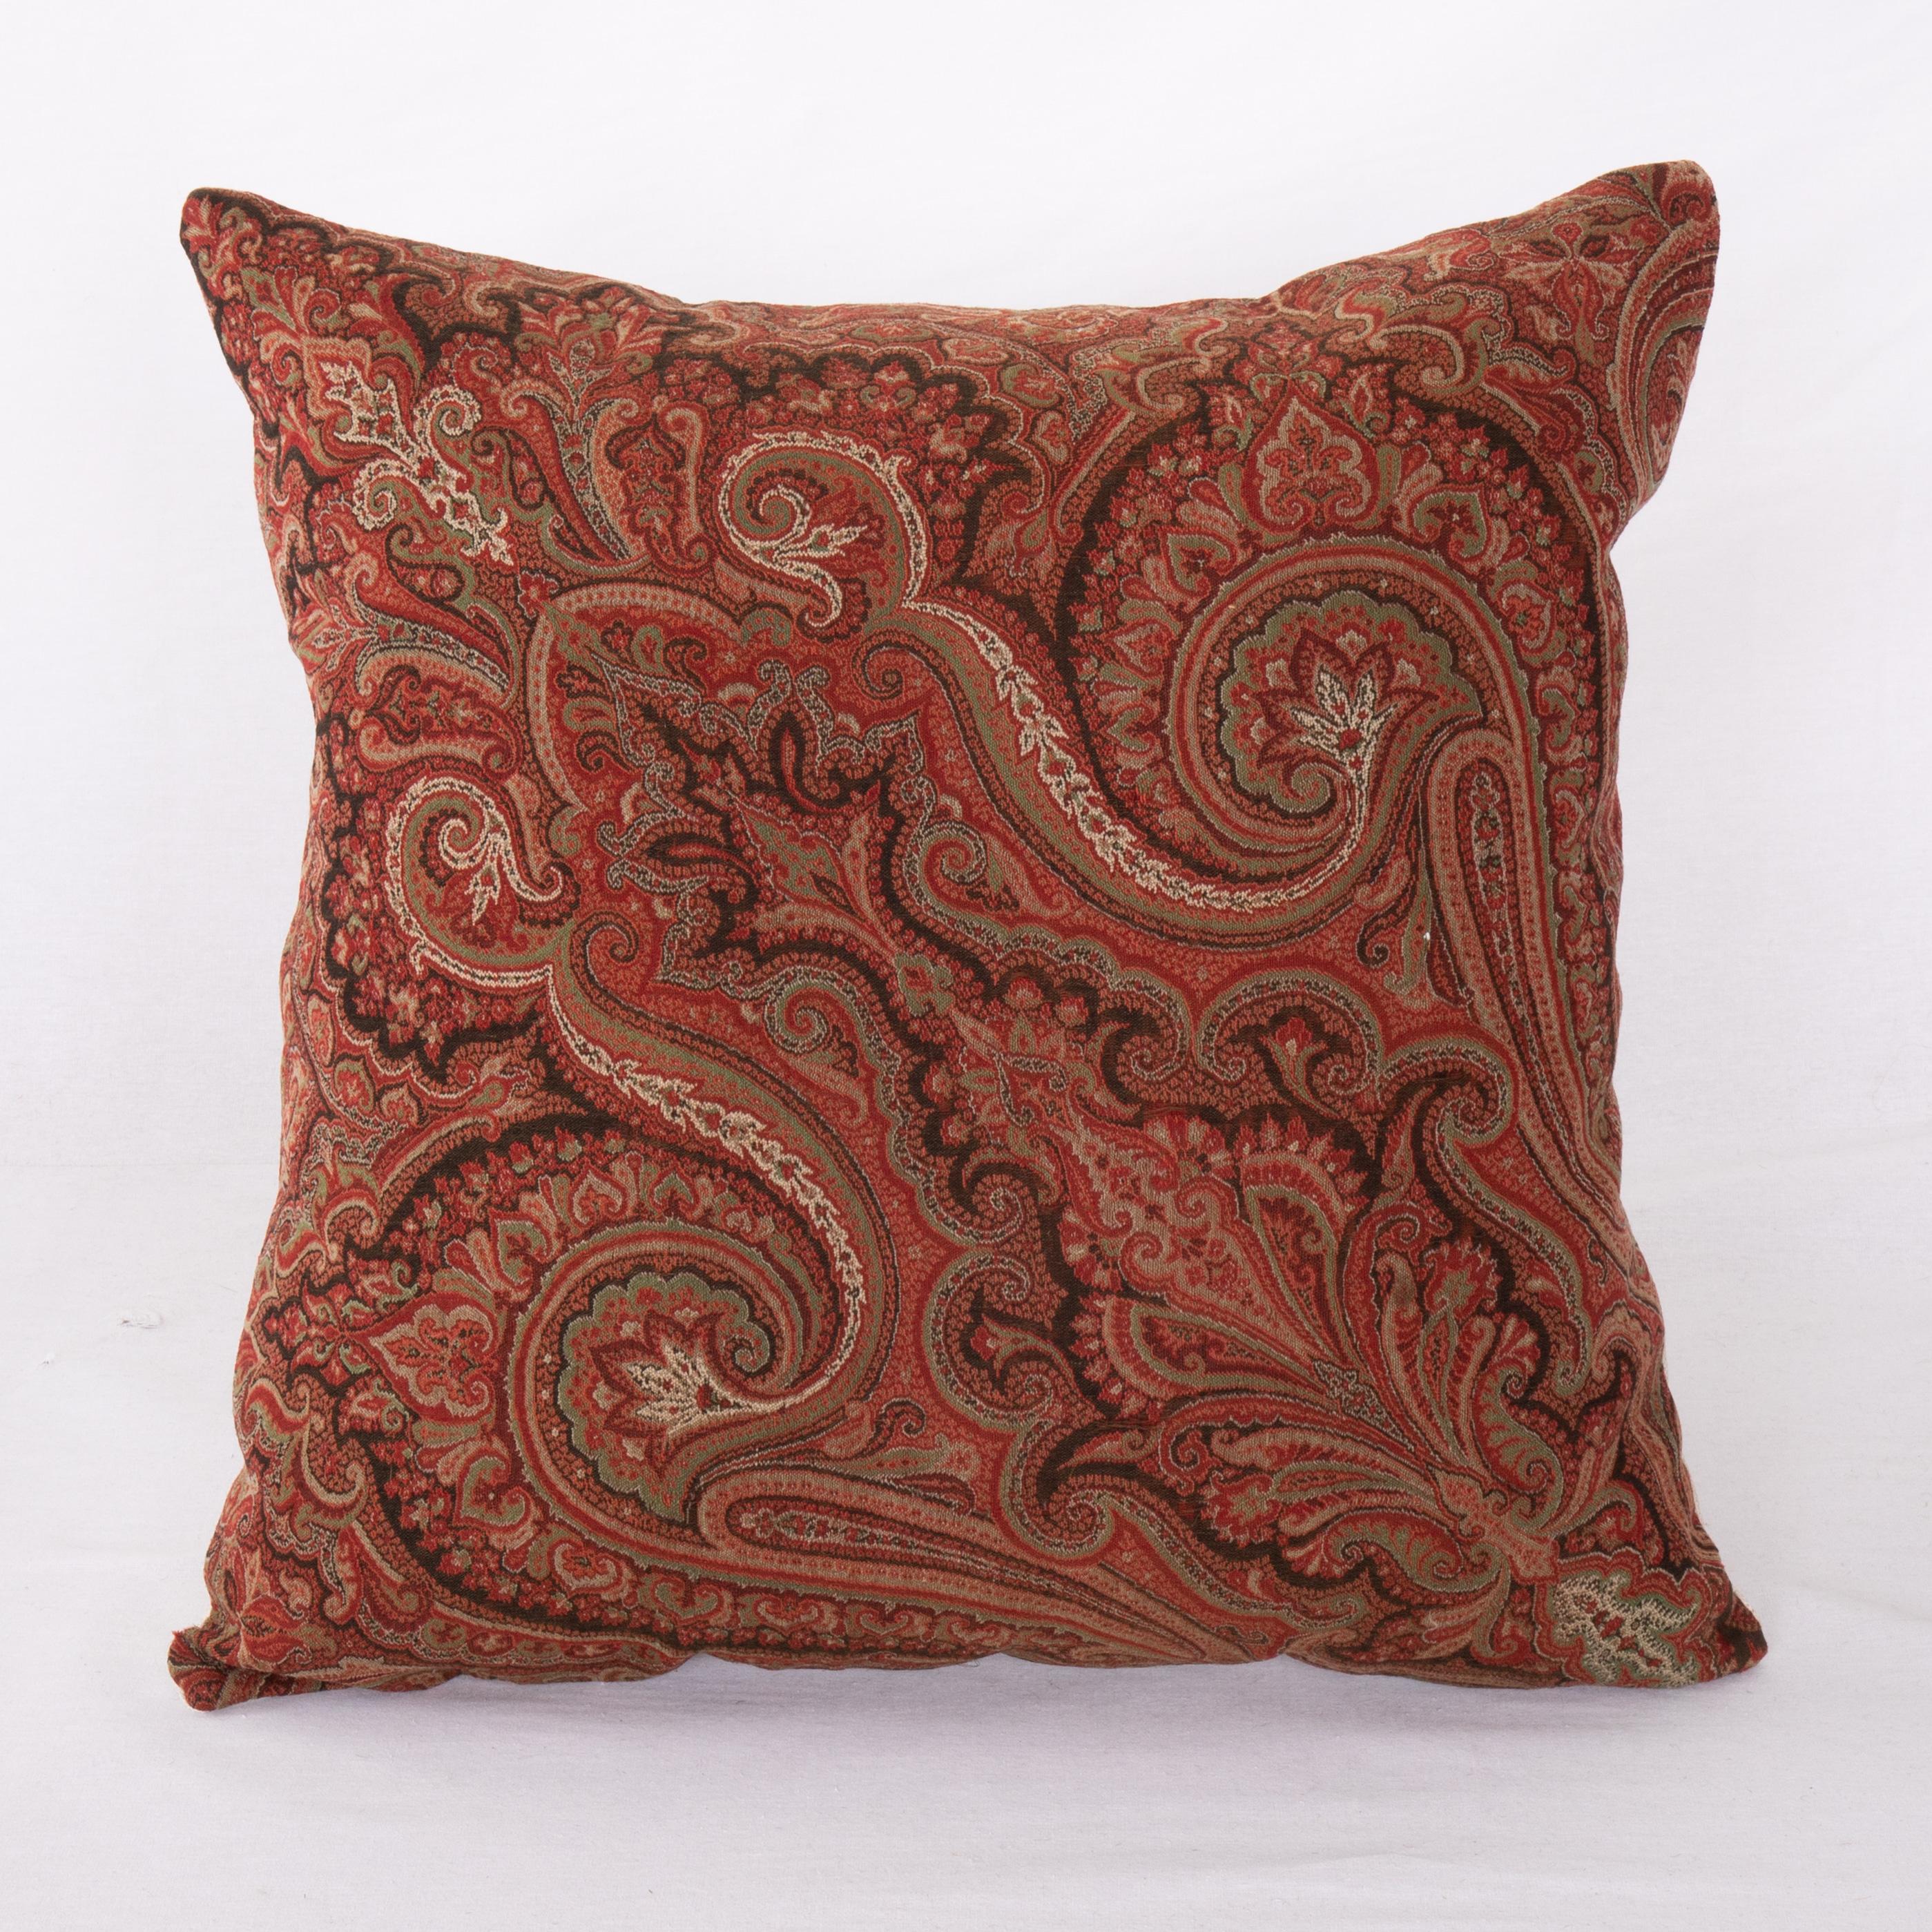 Antique Paisley pillow cover made from a European wool Paisley shawl, late 19th /early 20th century.
It does not come with an insert.
Linen in the back.
Zipper closure.
Dry. Cleaning is reccommeded.

Antique European Paisley shawls are a type